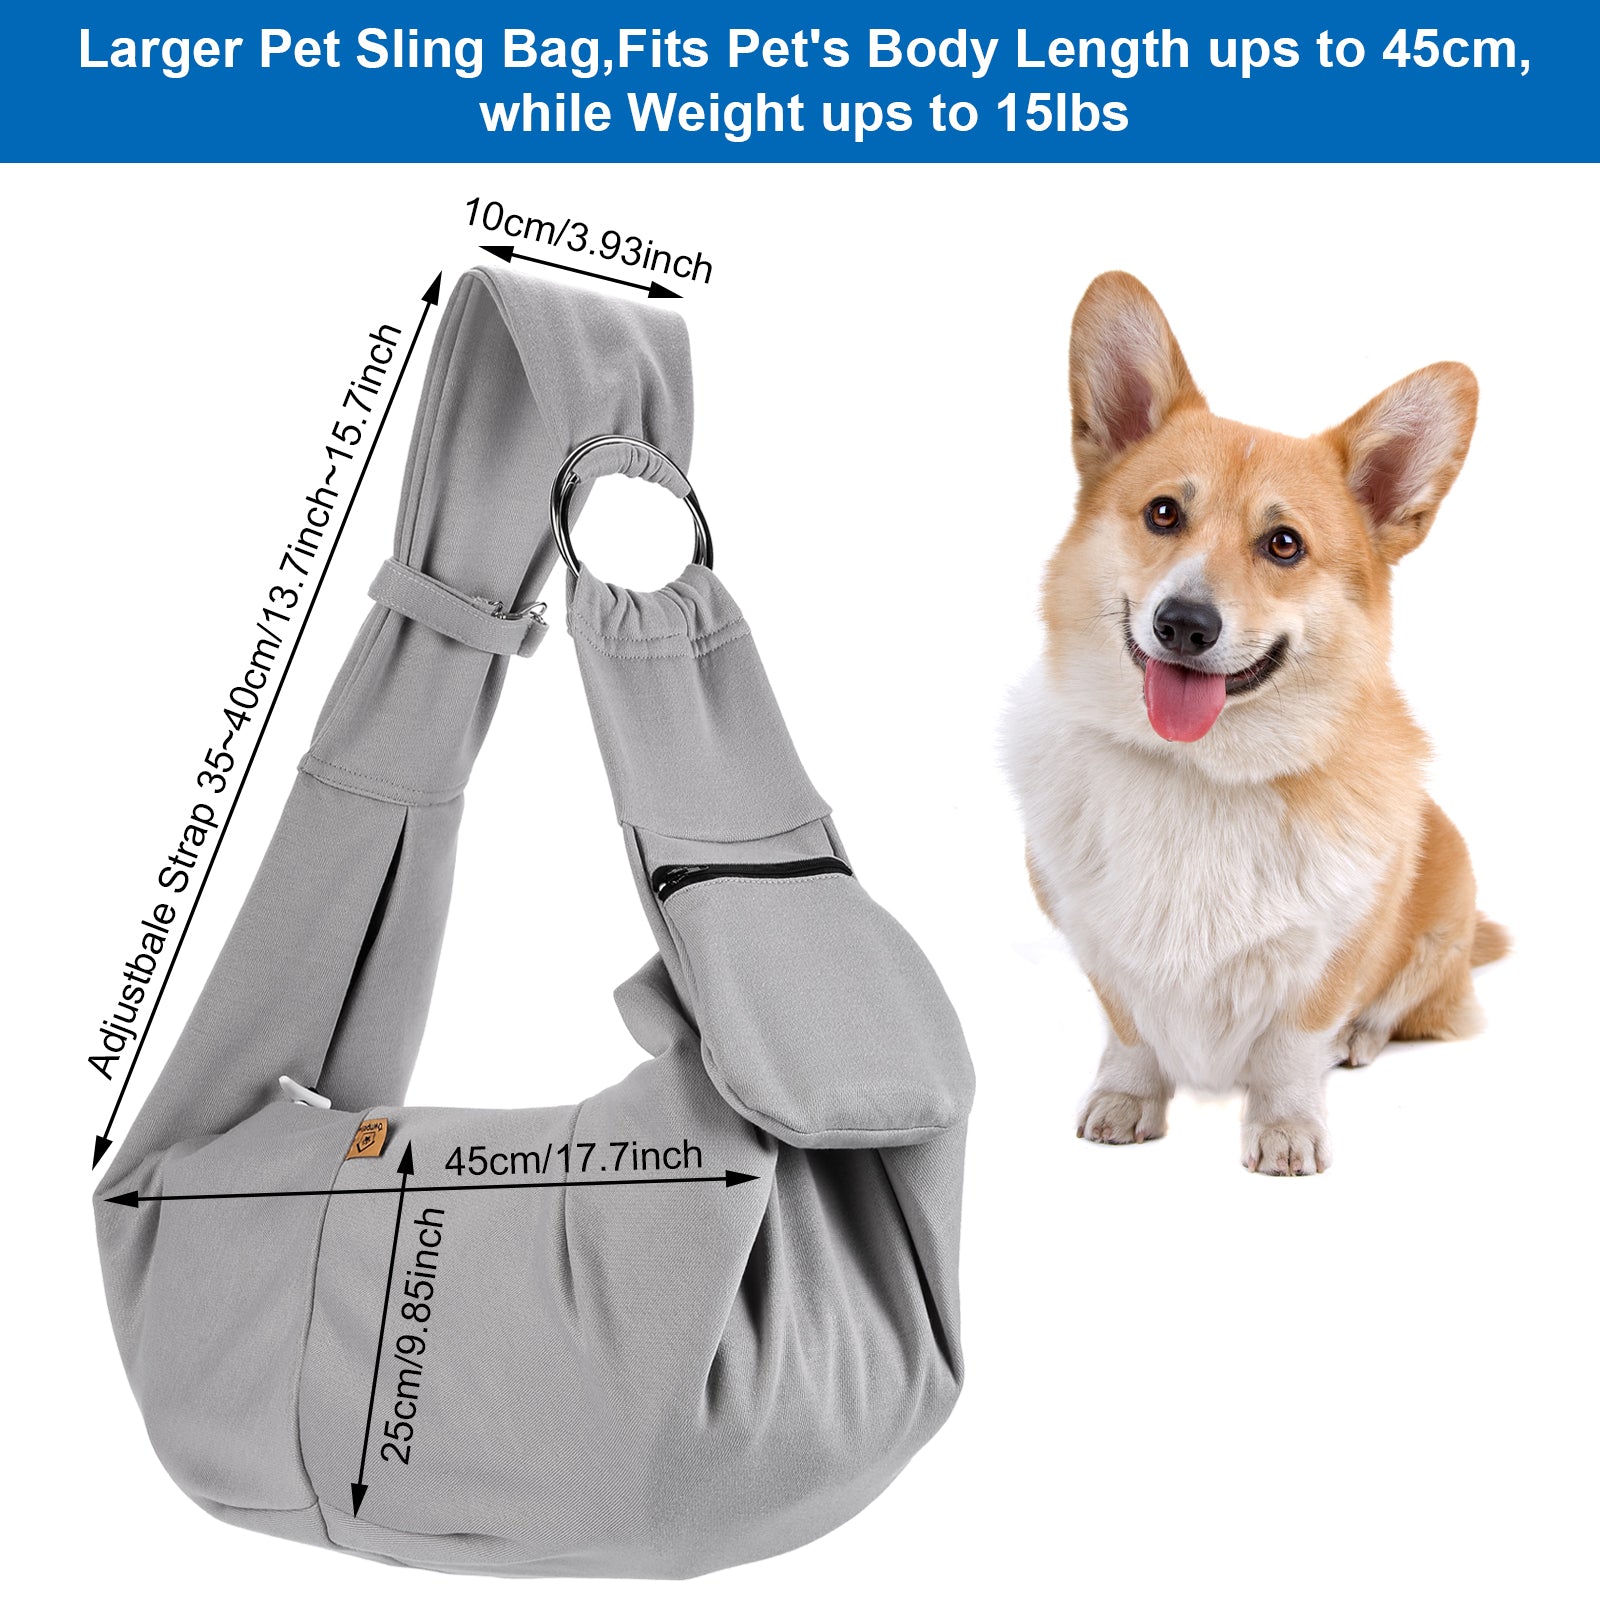 XL Pet Sling Carrier, Extra Large Dog Sling, Fits 15 to 25lbs